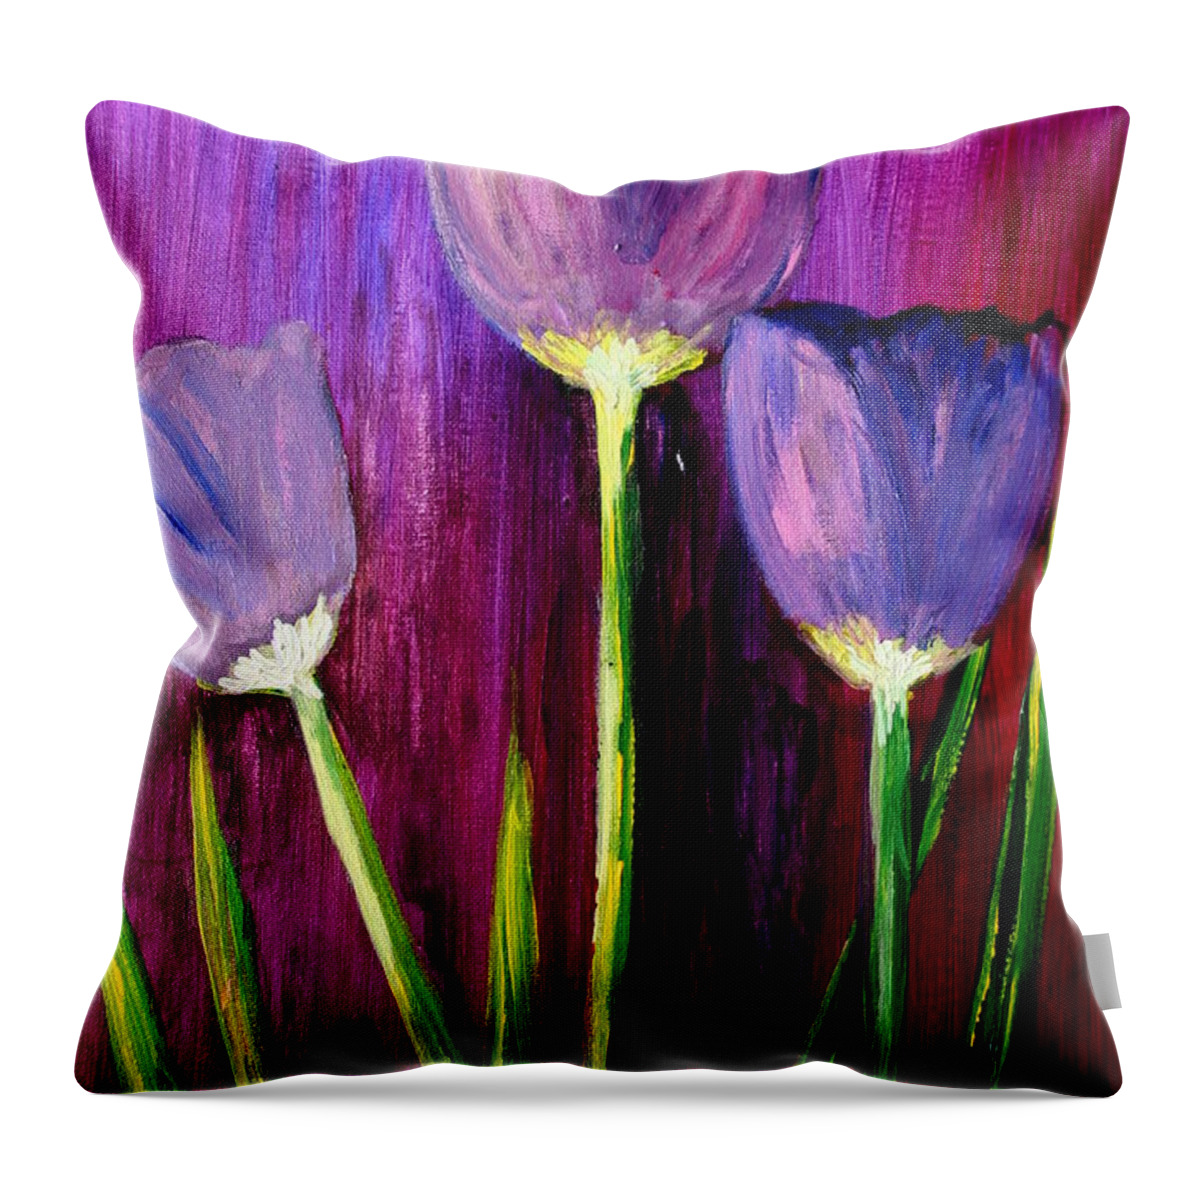 Flower Throw Pillow featuring the painting Purely Purple by Julie Lueders 